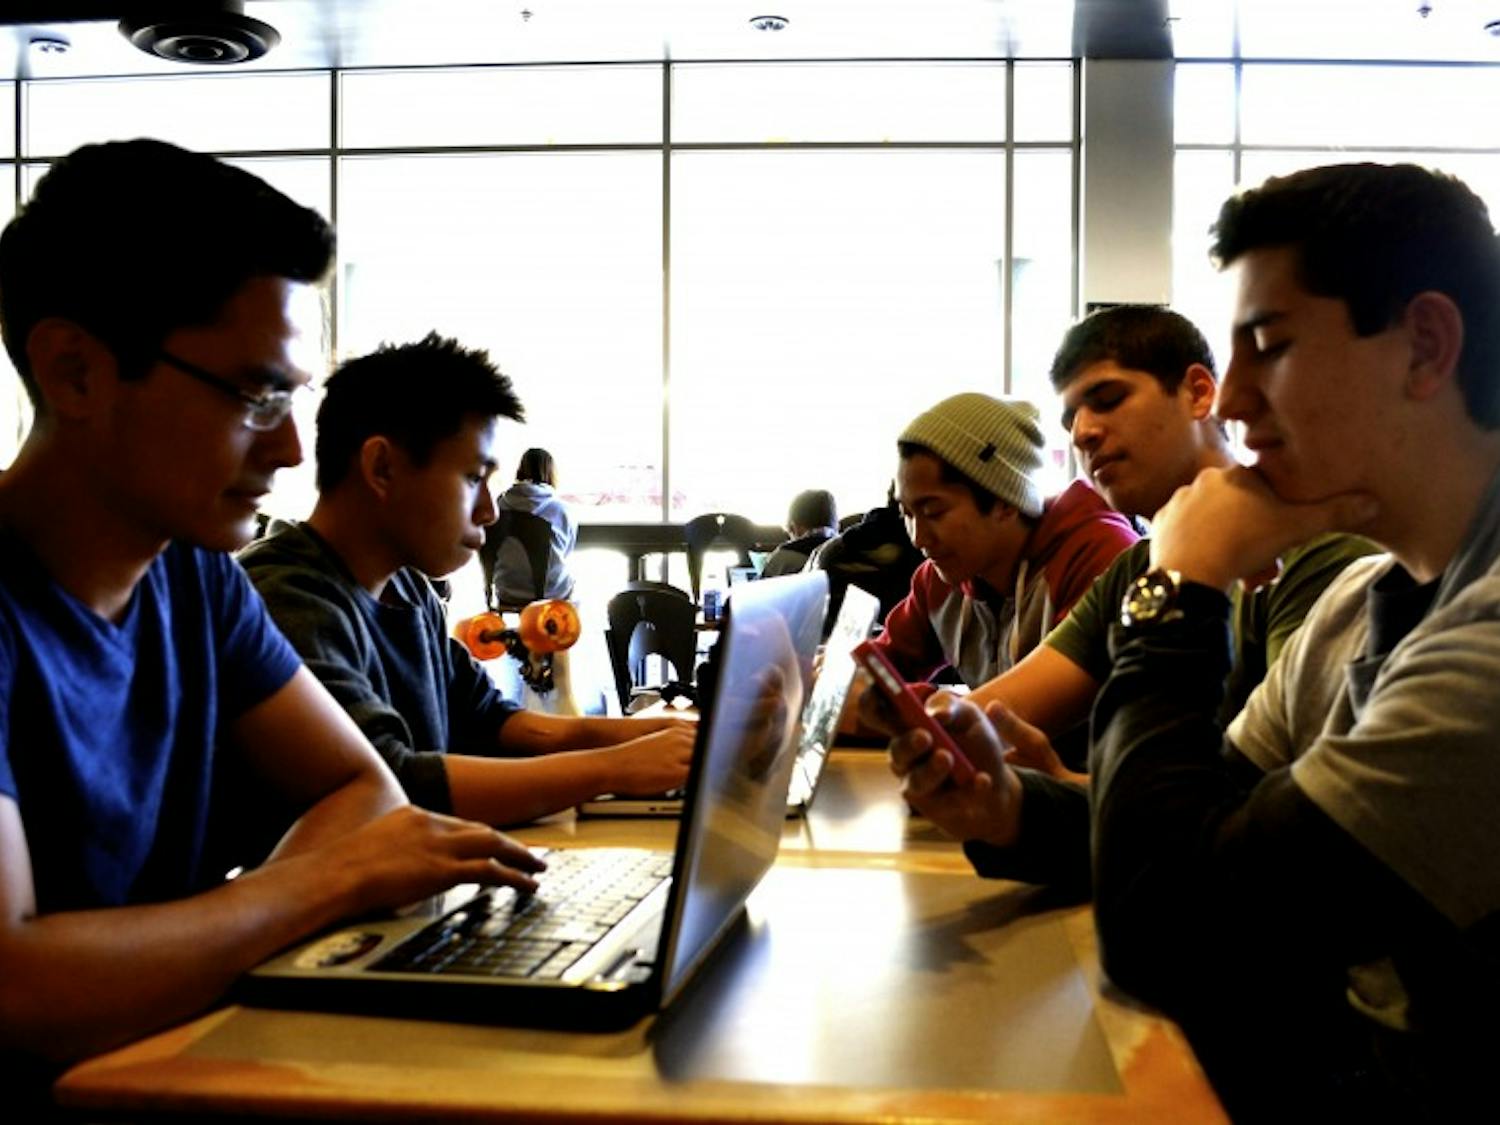 Among the ASU population there is a culture of HTML.
Photo by Luu Nguyen